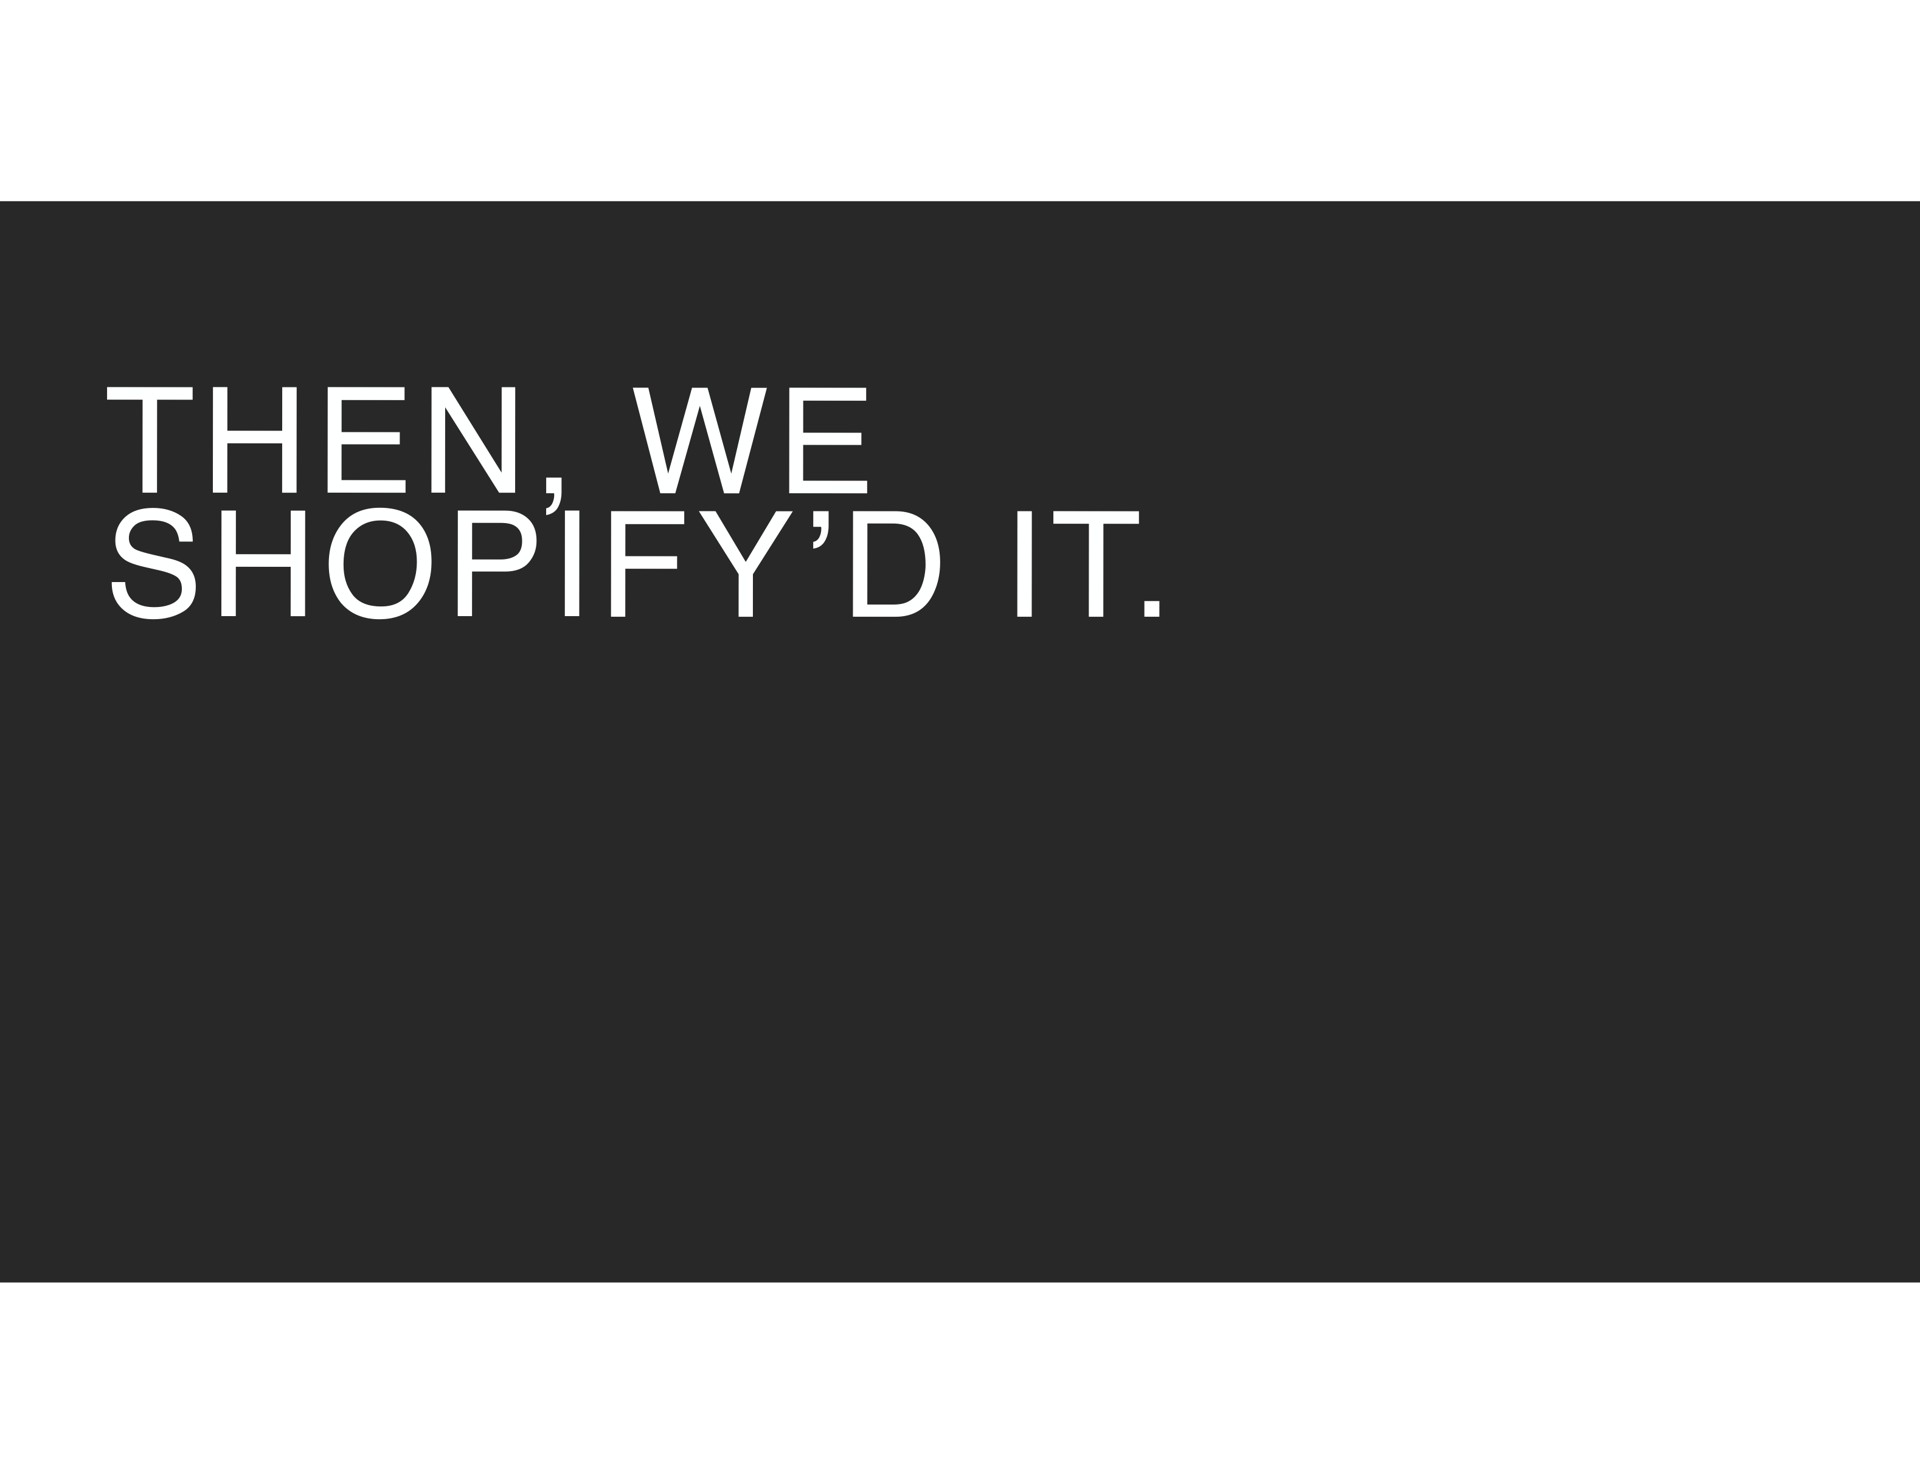 then we it | Shopify